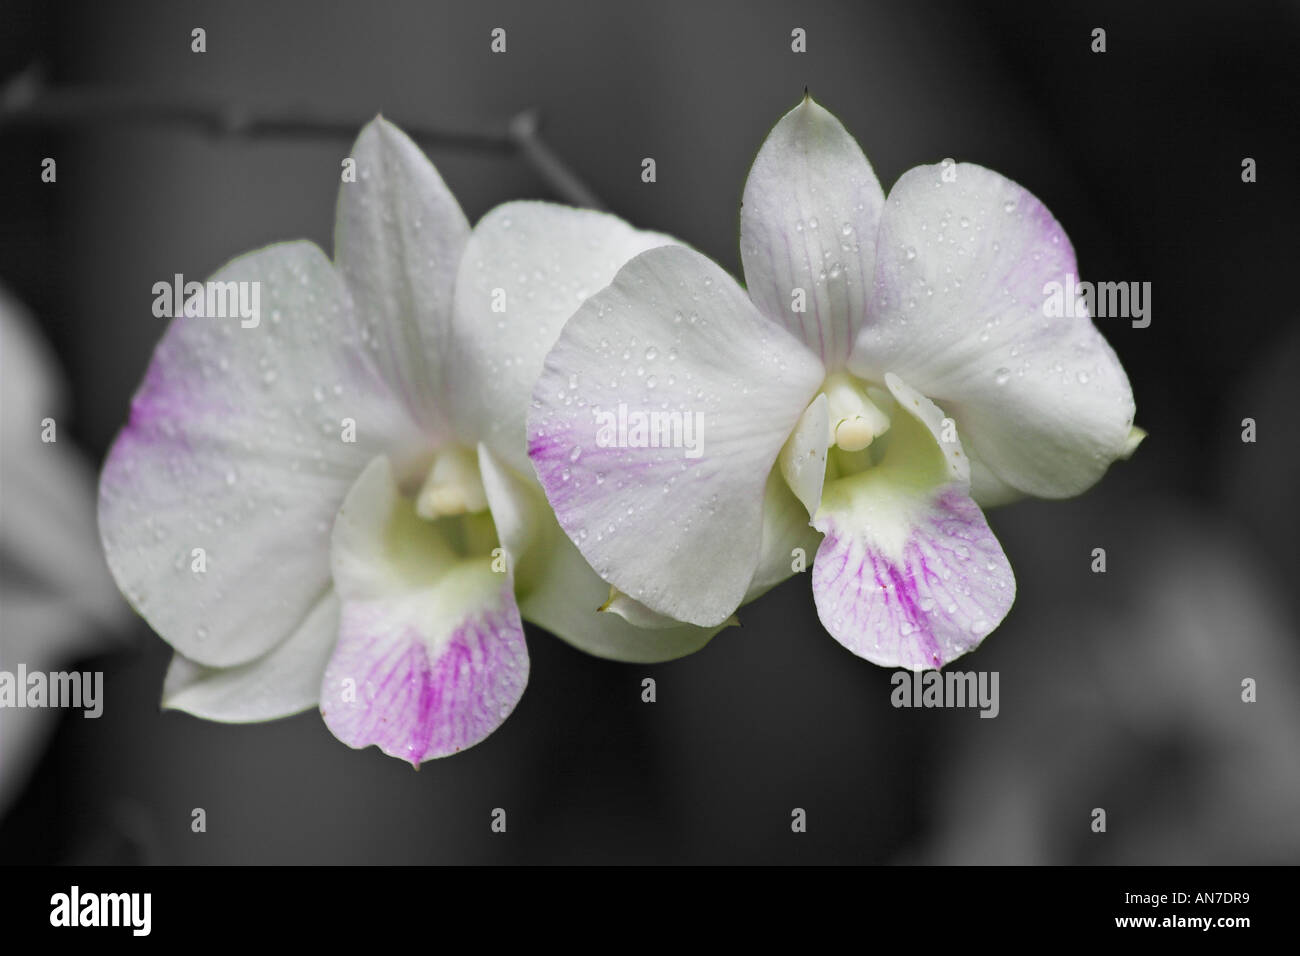 Two white and purple orchids against a greyed out background black and white Stock Photo